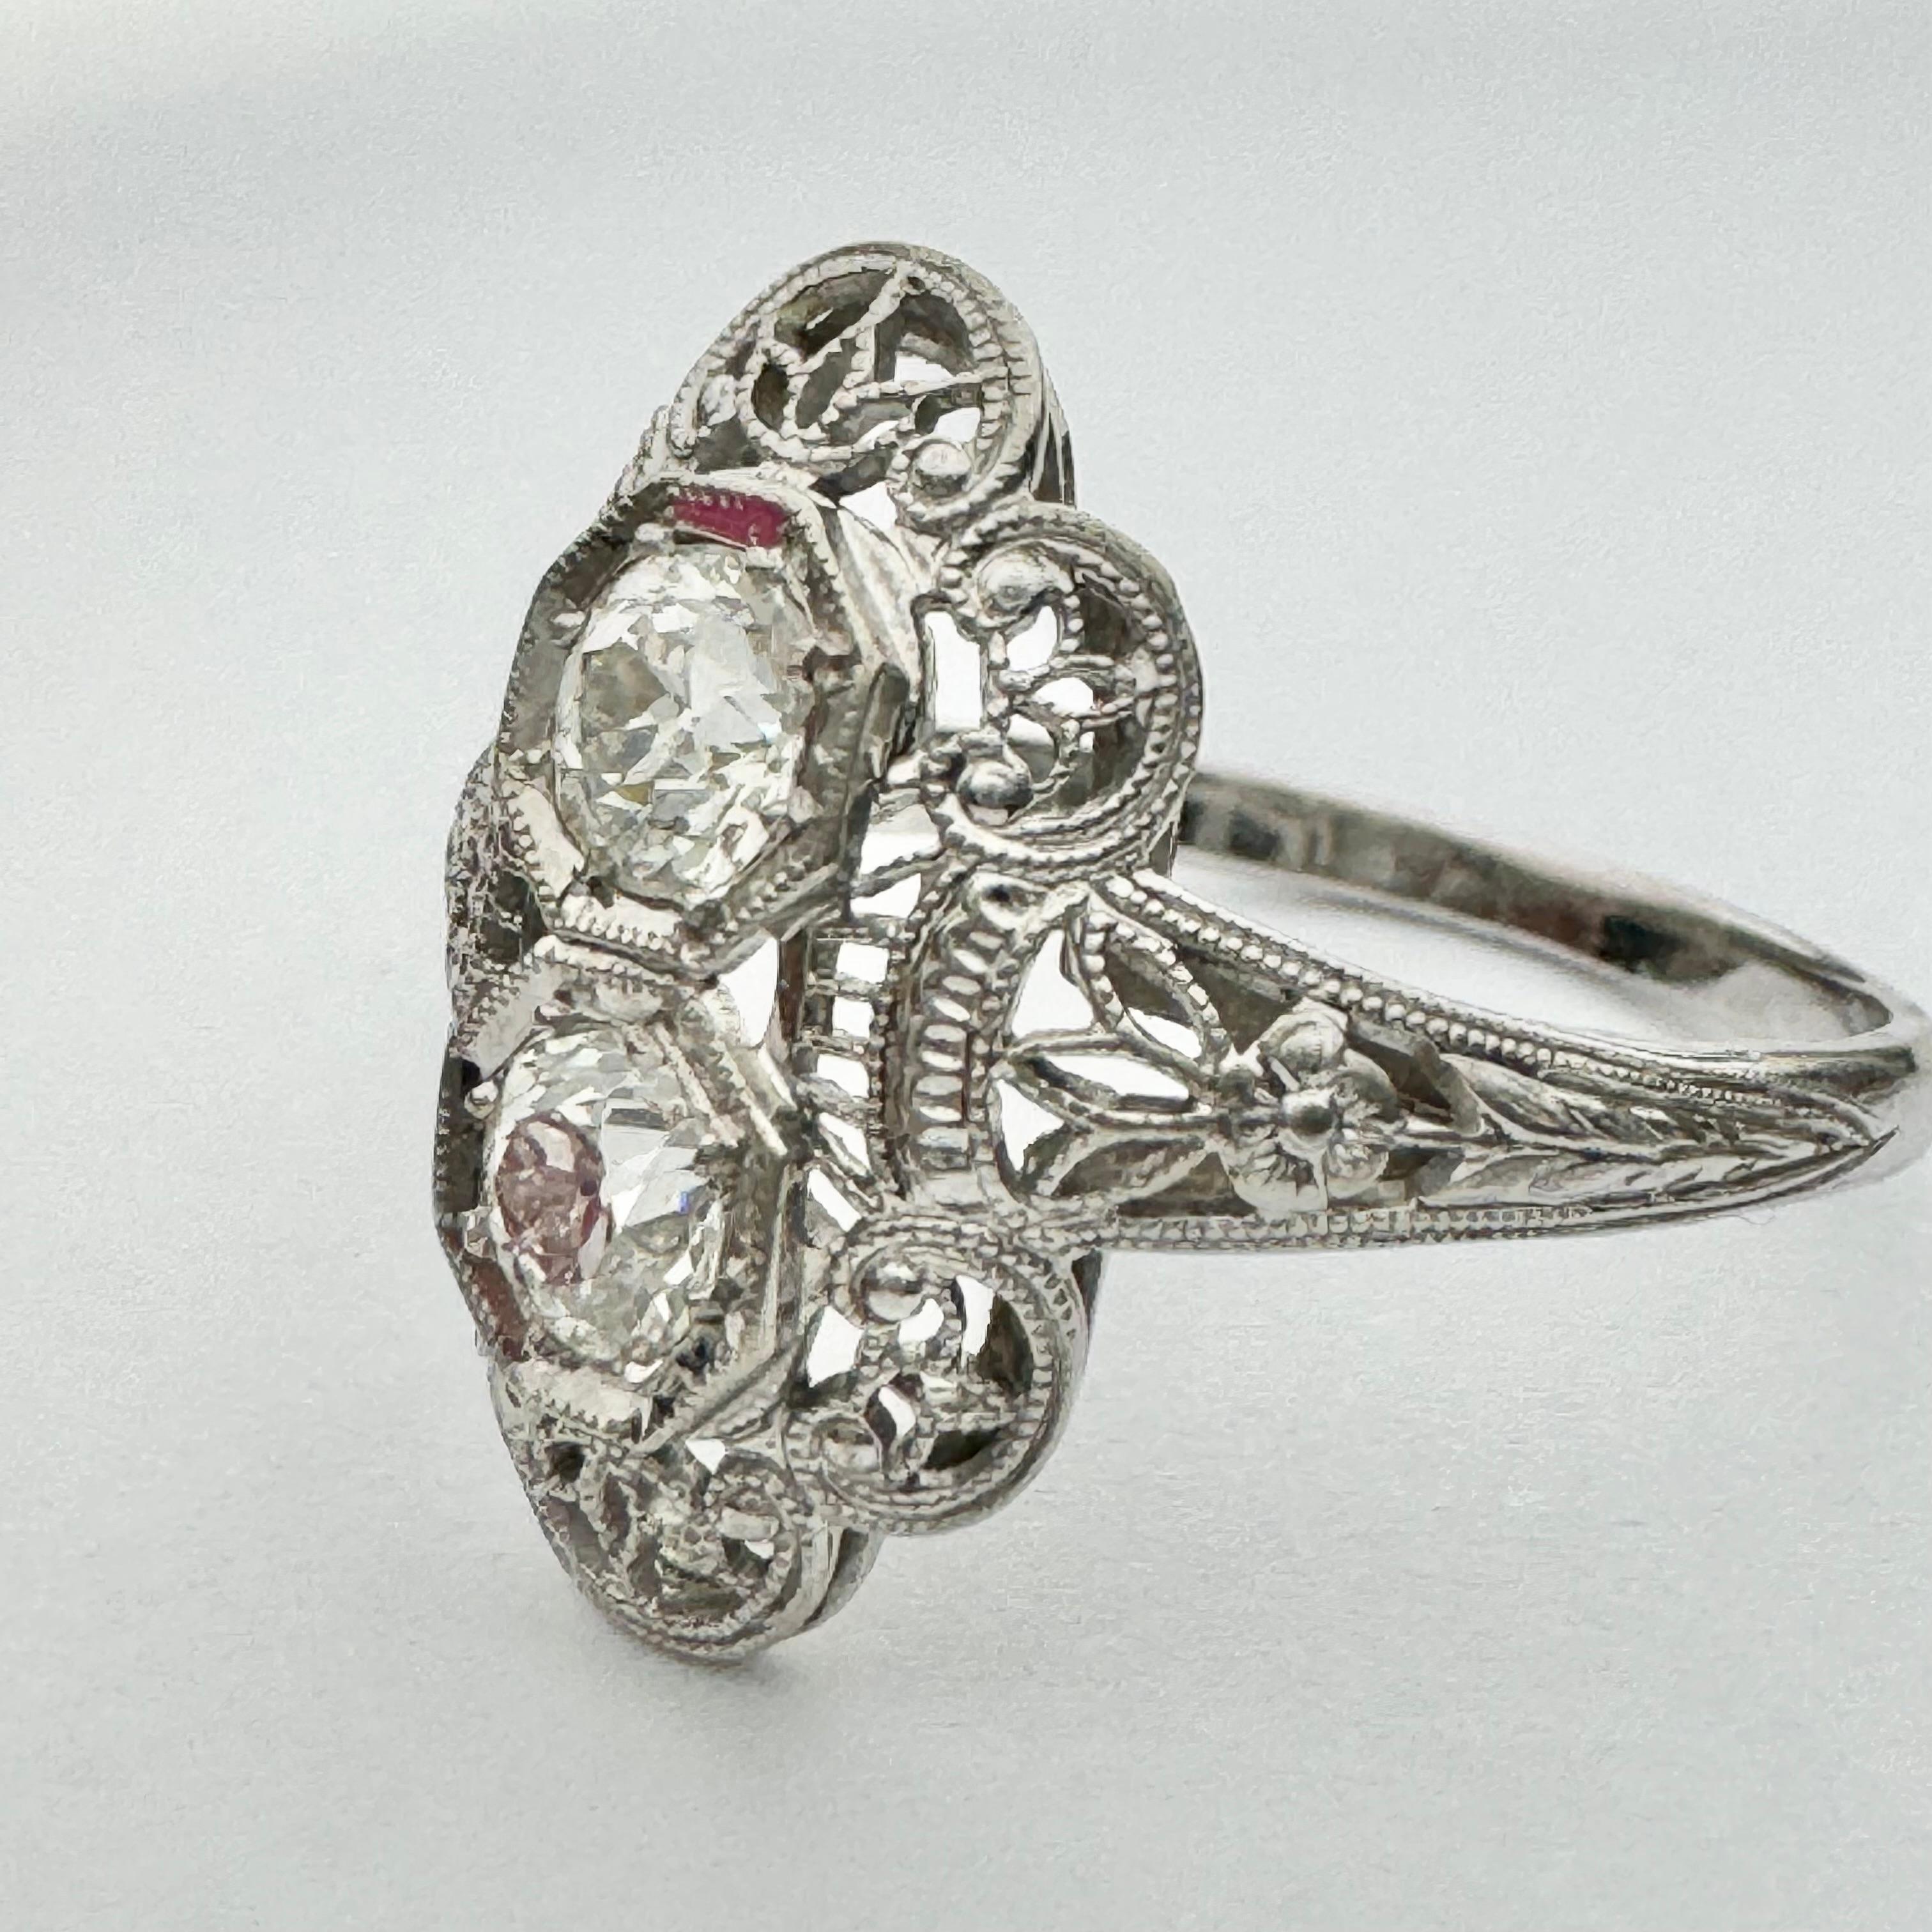 Uniquely beautiful antique style ring in 14k solid white gold. This beautiful ring features two stunning round brilliant old mine cut diamonds. This ring also showcases gorgeous and delicate antique filigree and milgrain designs. The beautiful pair